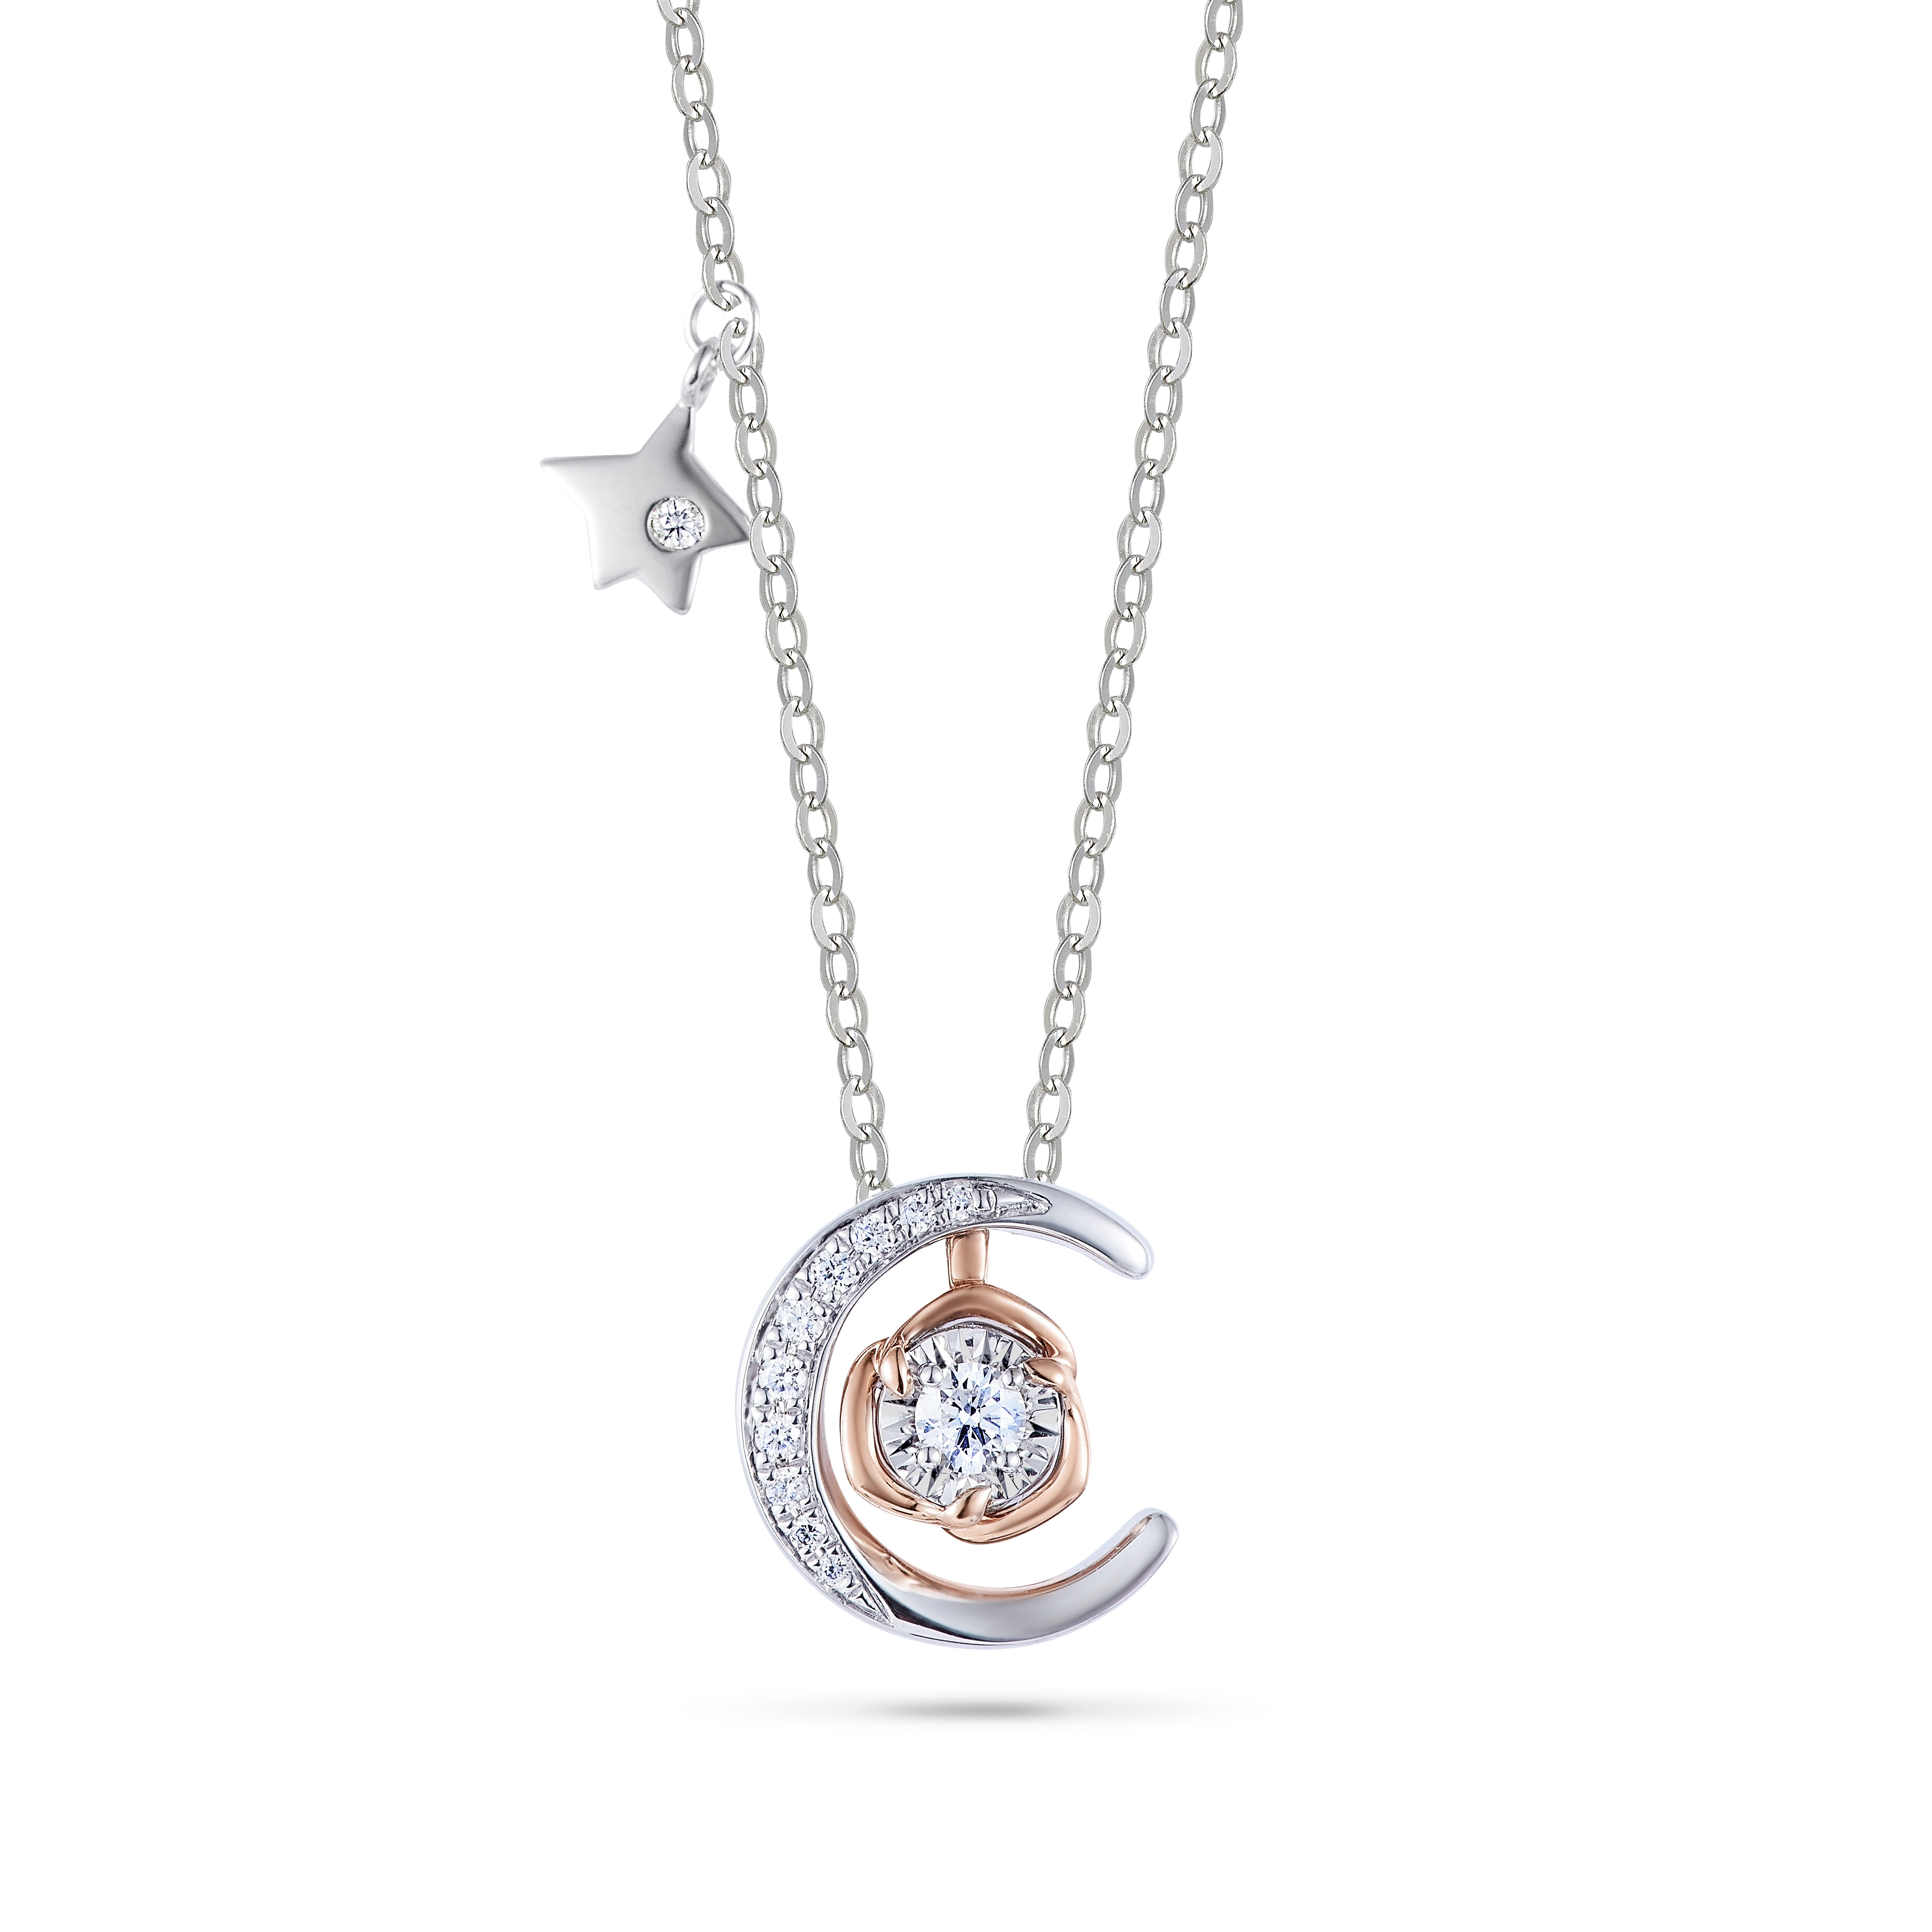 18K White Gold and Rose Gold Diamond Necklace